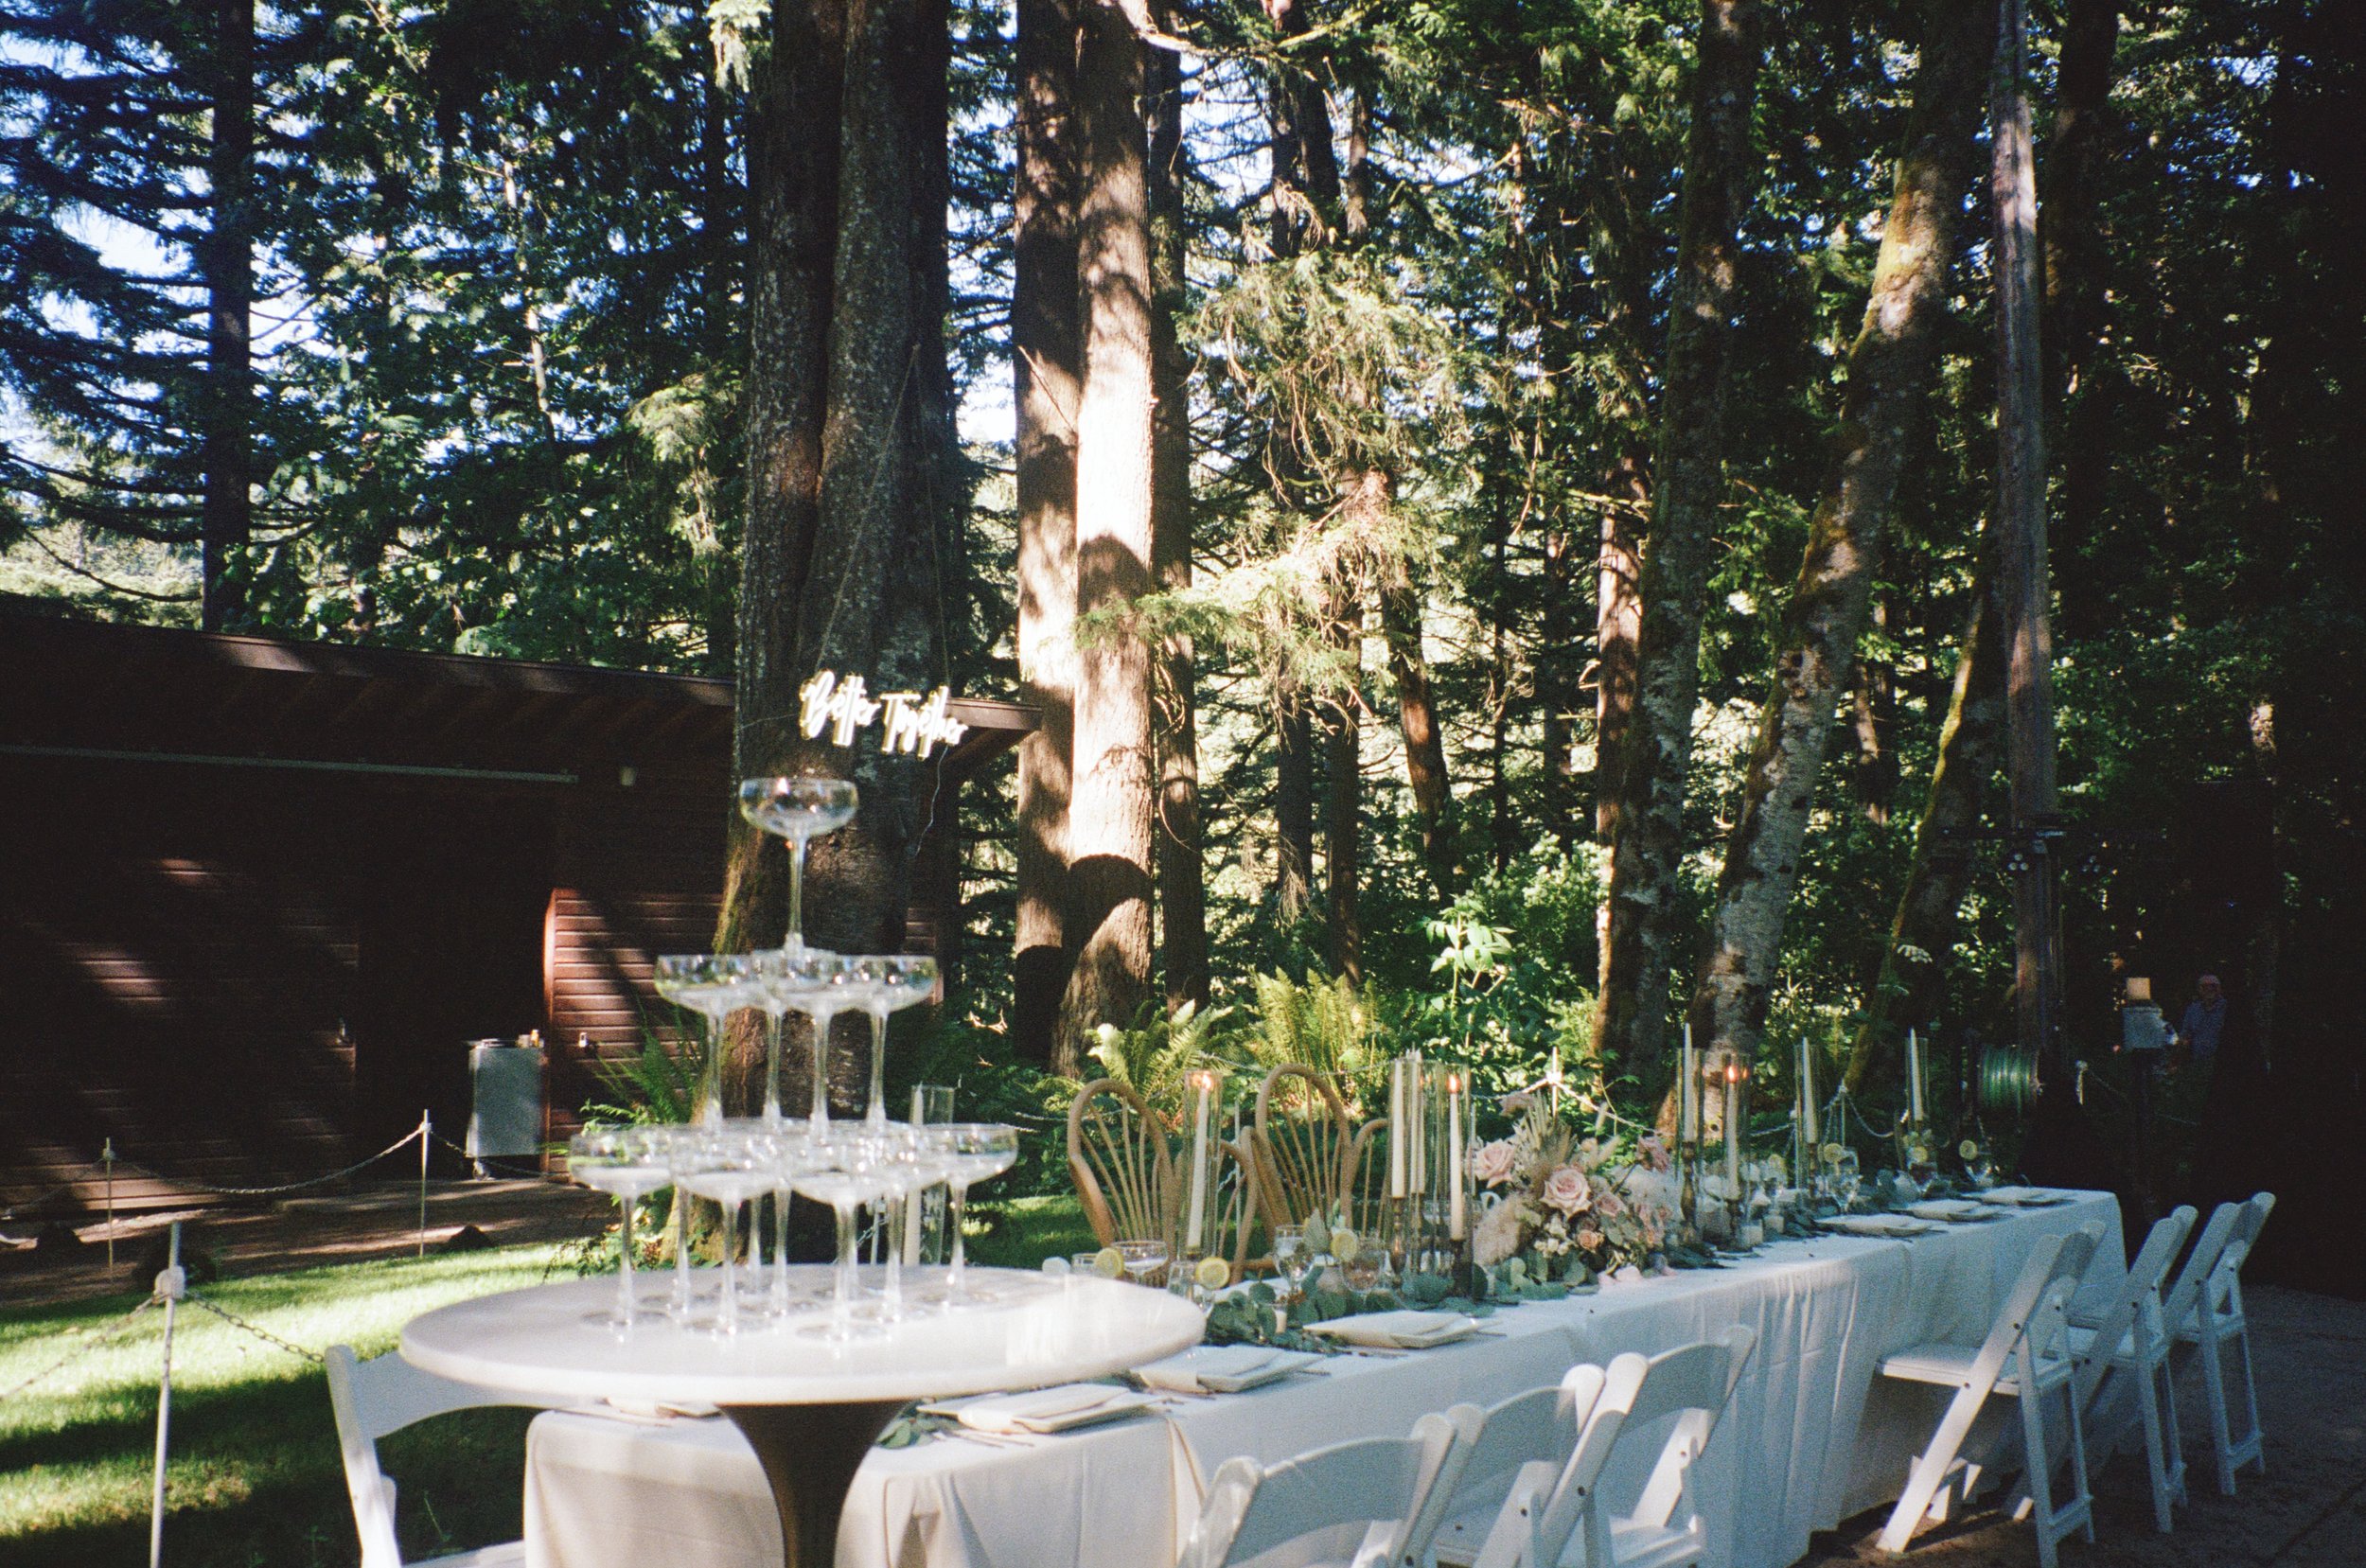 champagne tower and wedding reception table with wedding decorations with a backdrop of trees. Oregon coast wedding film photographer